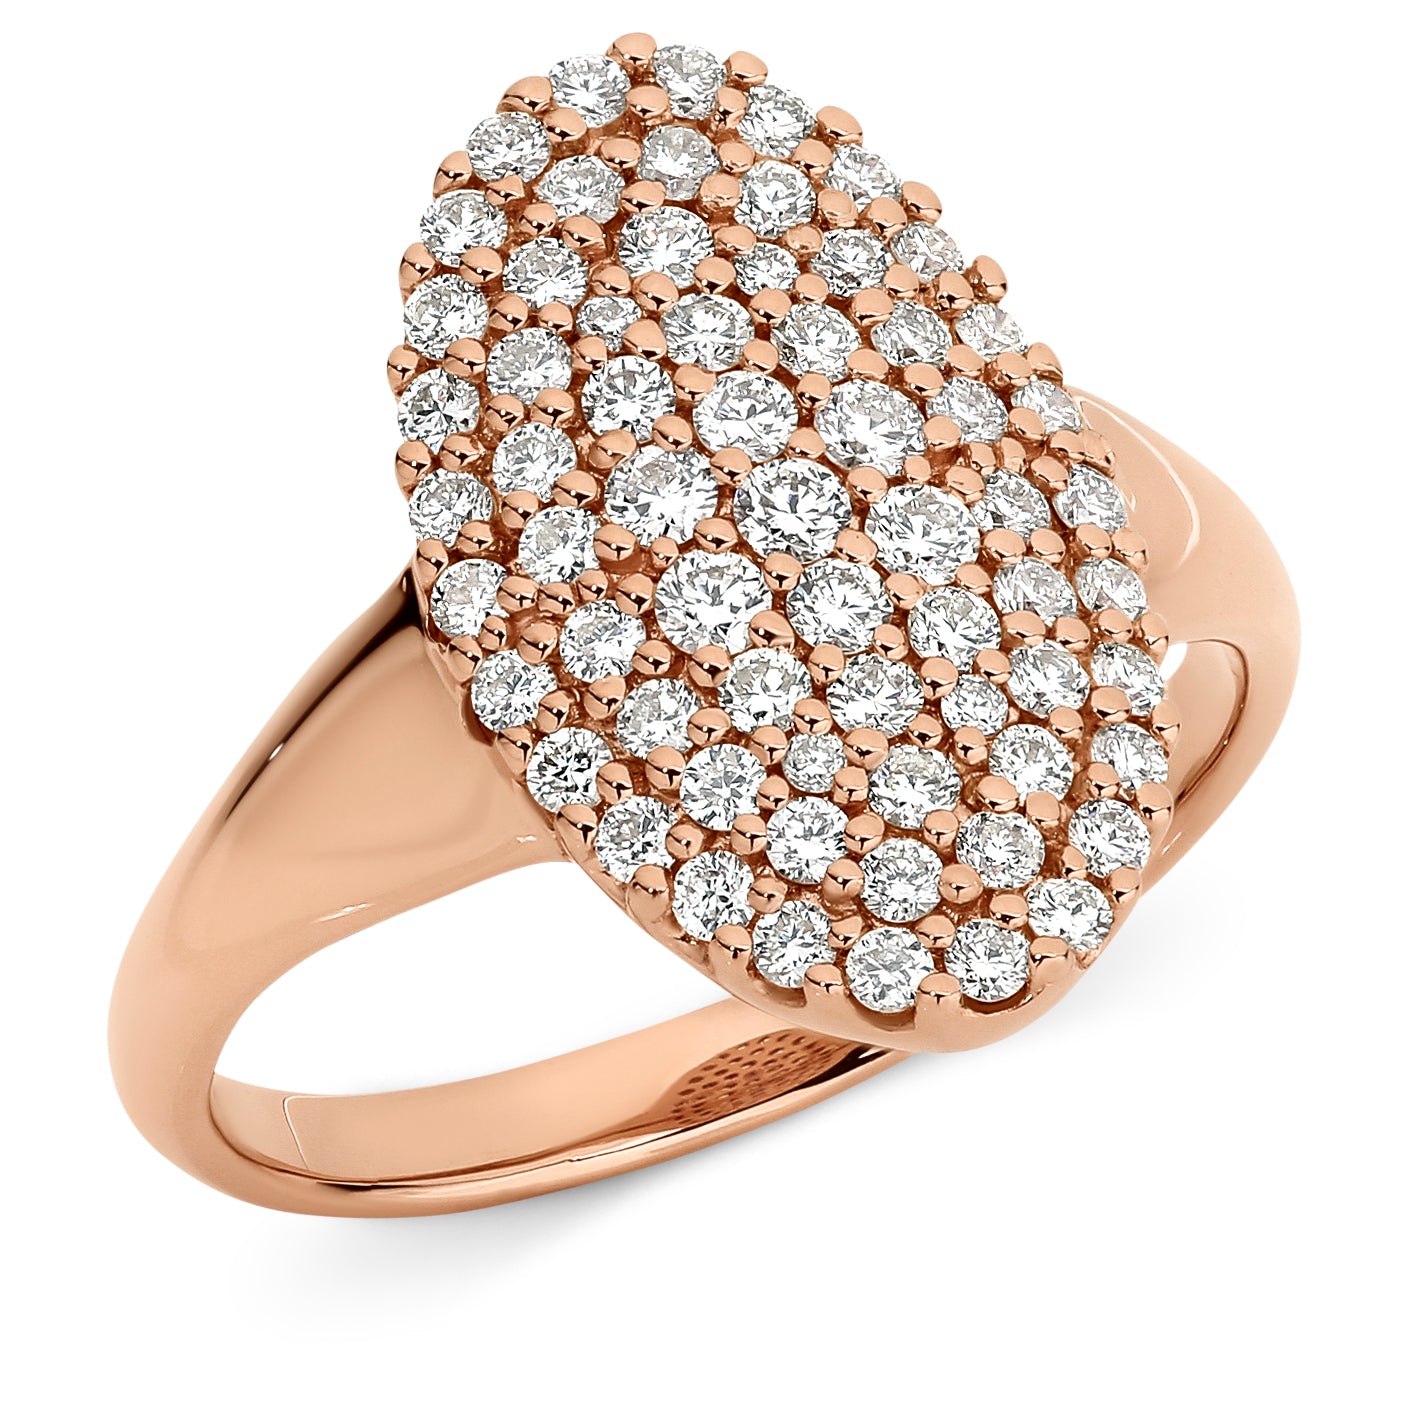 Katherine' Oval Cluster Diamond Ring in 9ct Rose Gold